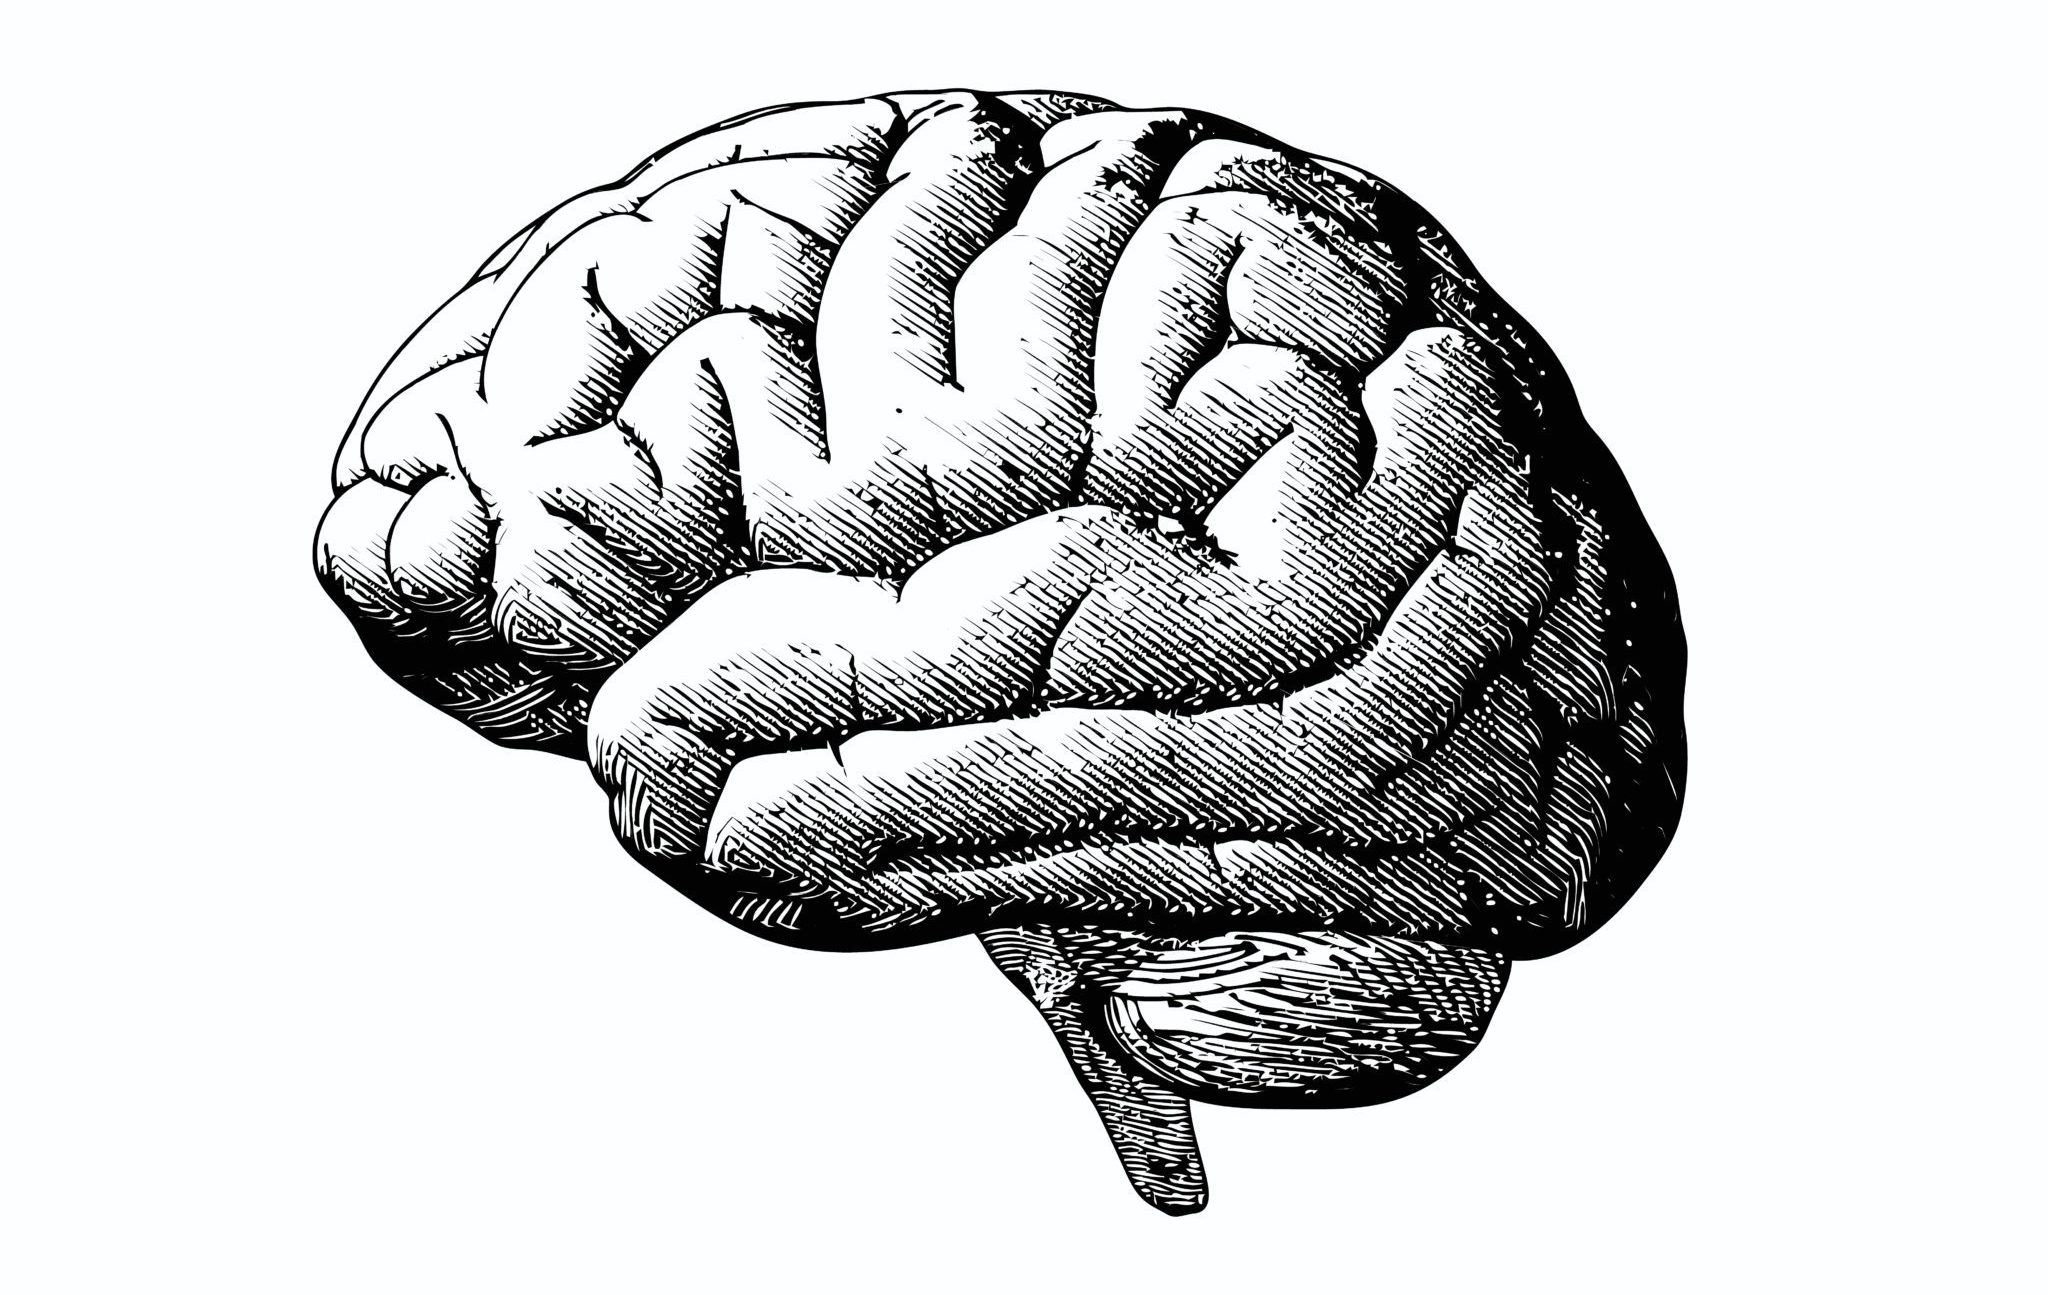 Engraving,Brain,Illustration,In,Gray,Scale,Monochrome,Color,On,White